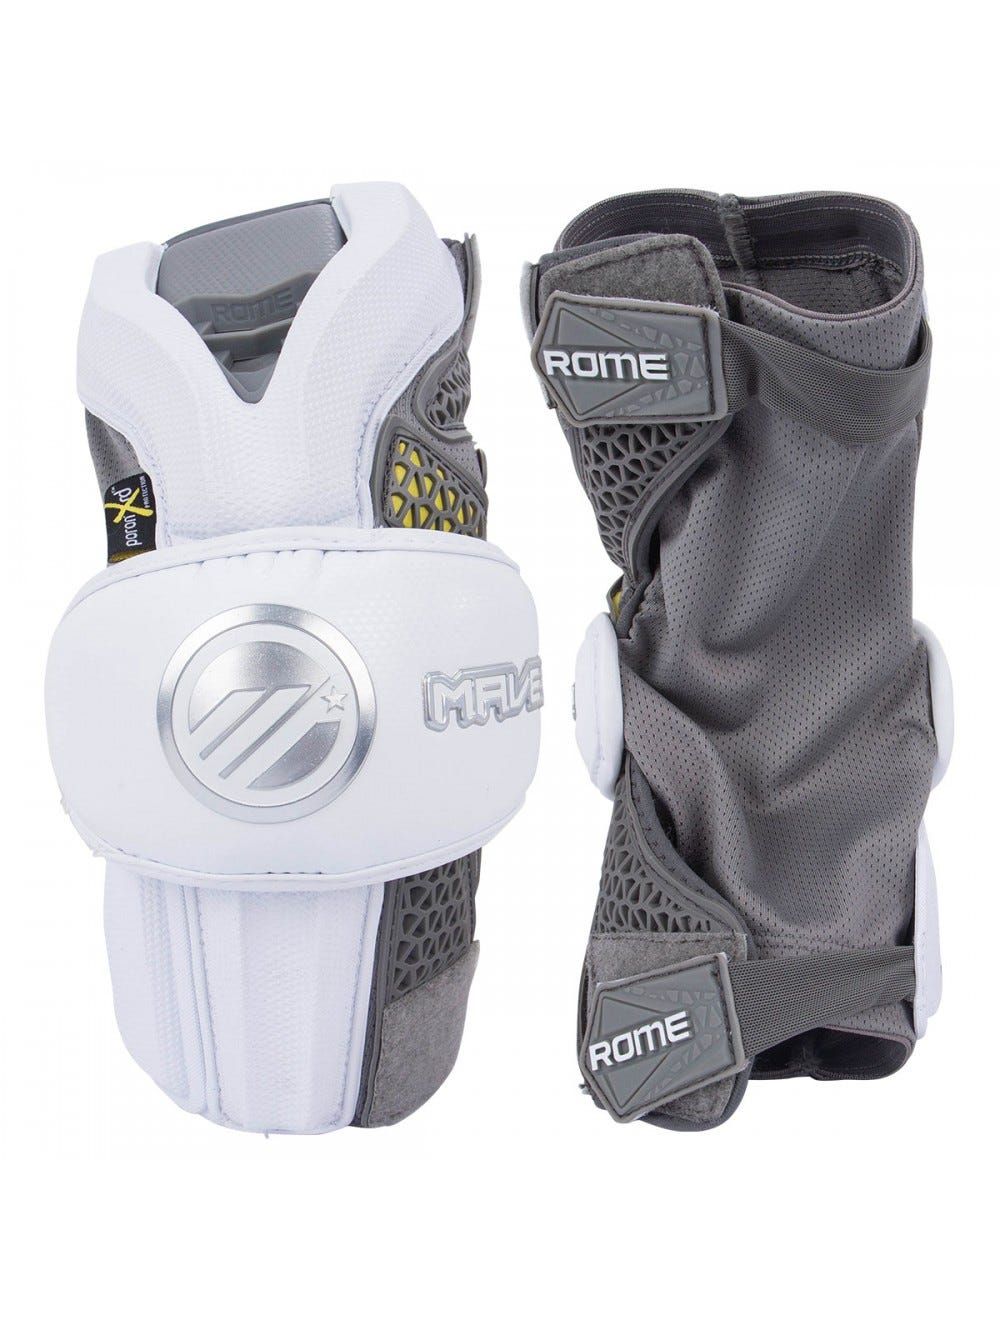 NEW Warrior Rabil NXT Youth Lacrosse Arm Pads Black Lists @ $49 